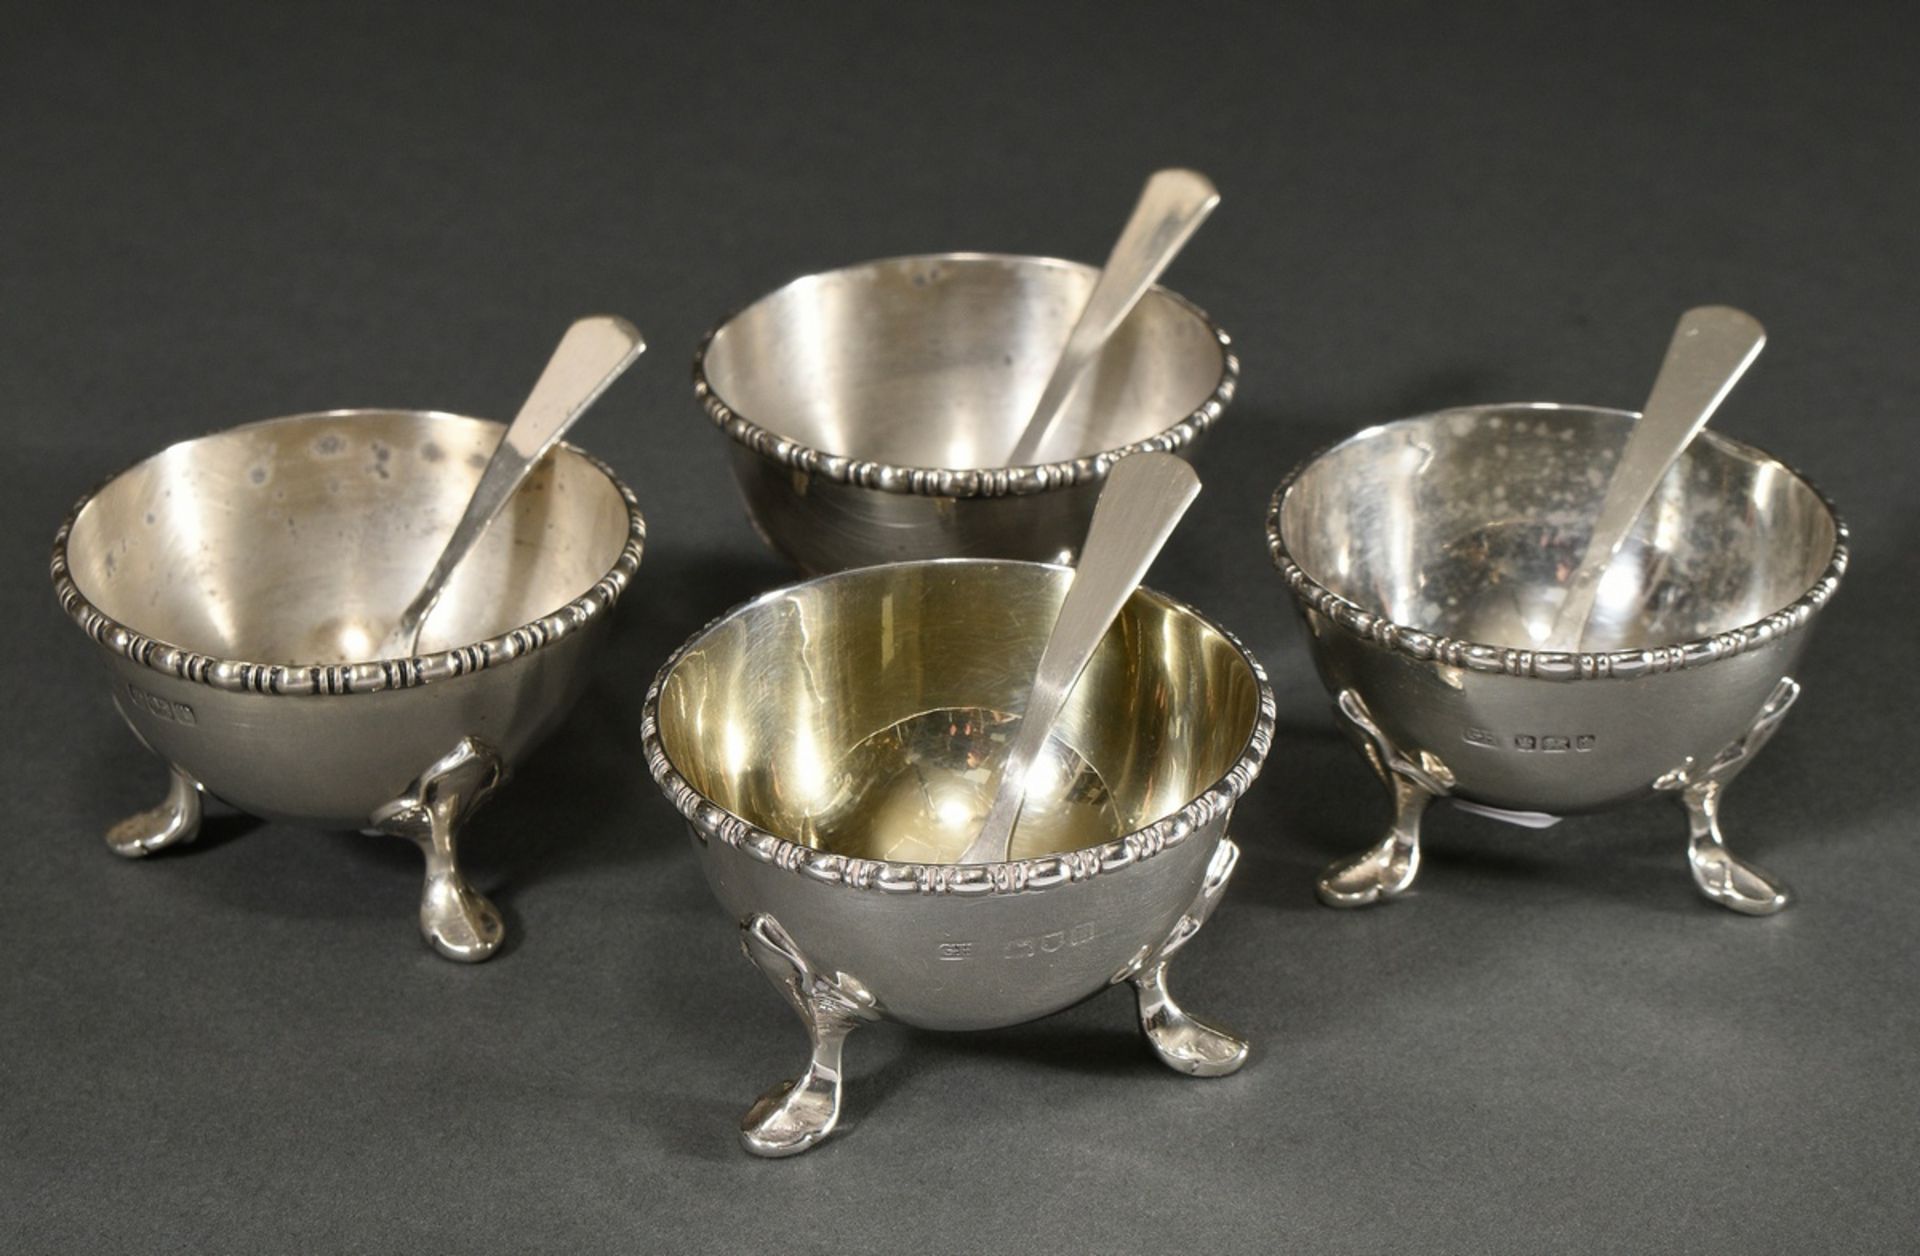 4 English salt cellars with beaded rim on leaf feet, enclosed 4 spoons, MM: Harrison Brothers & How